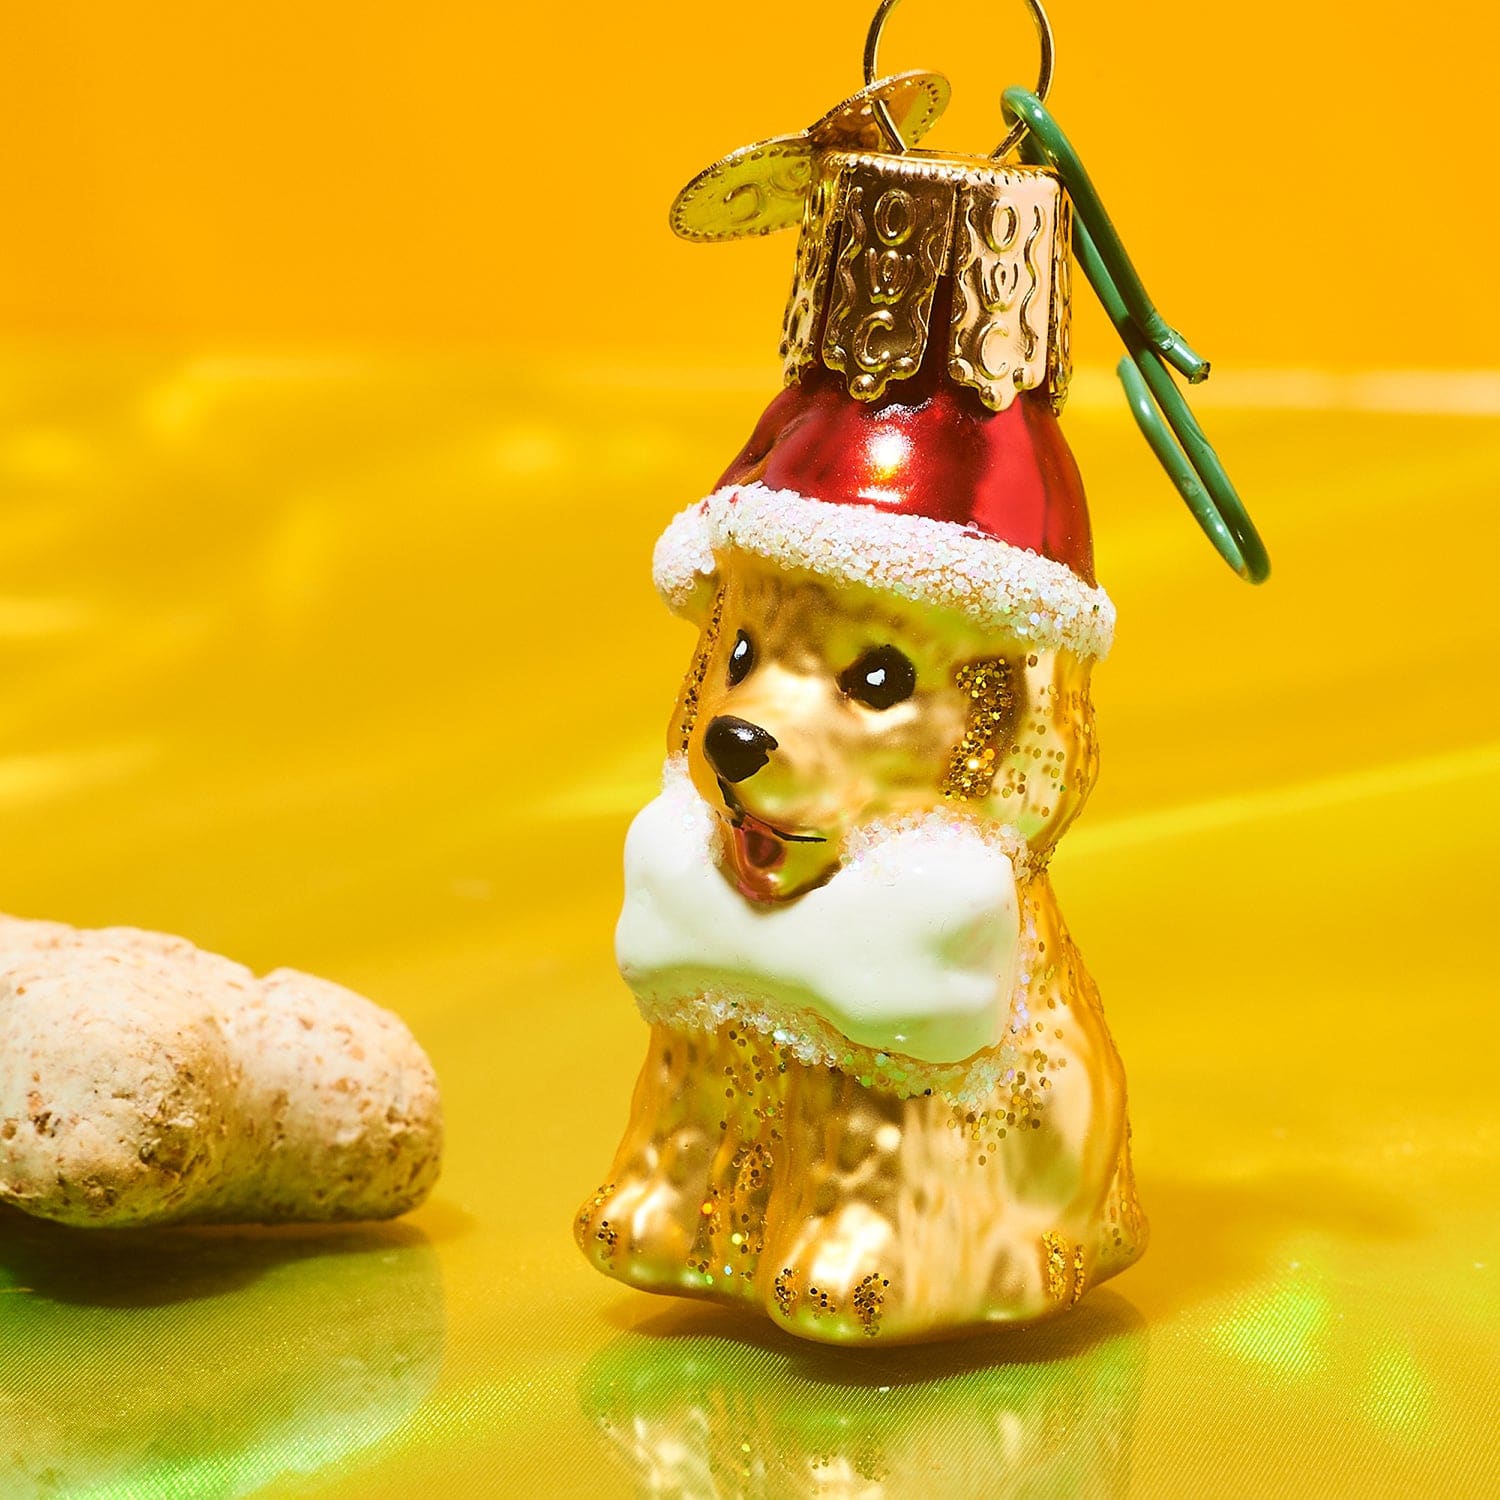 Mini Ornament Owc Jolly Pup 0623 - Groupbycolor - Ornament23